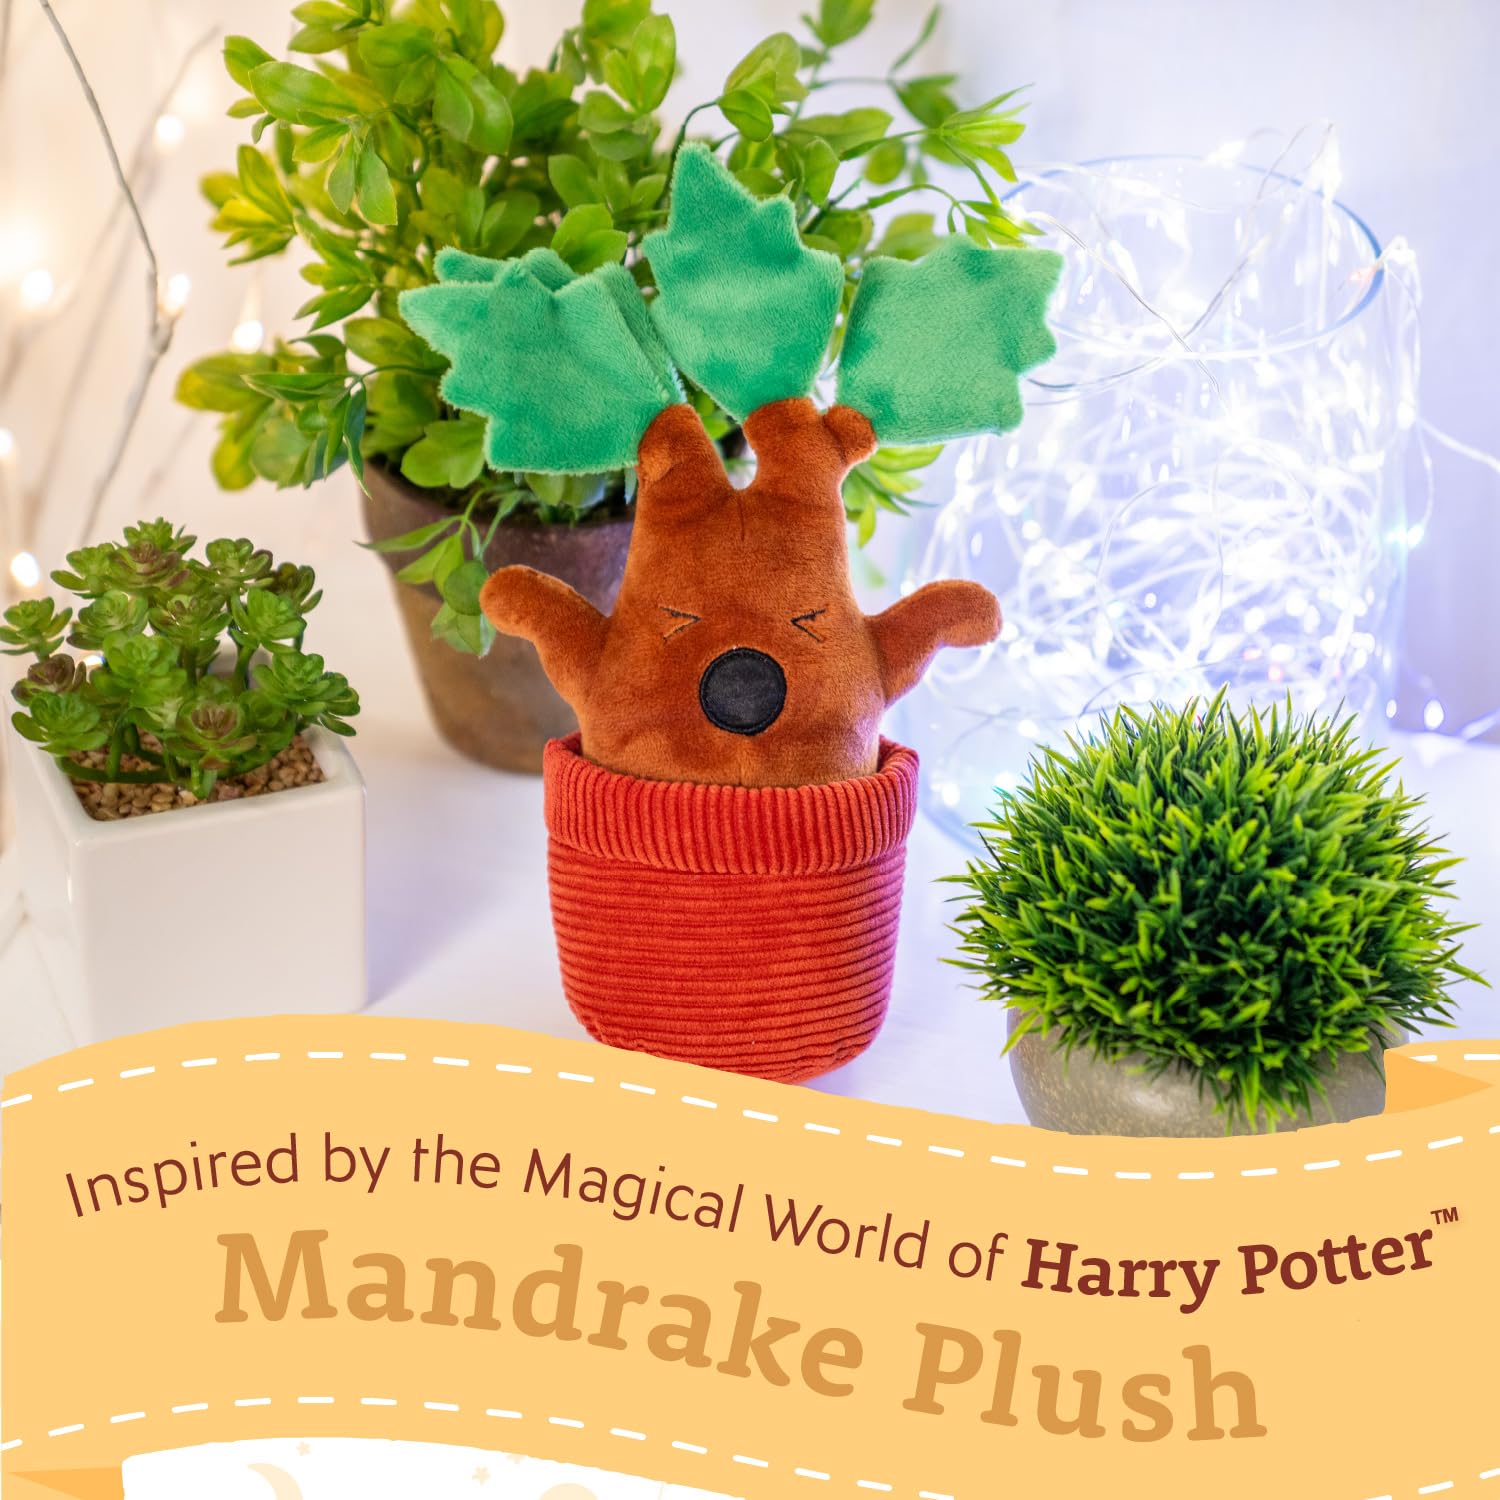 Harry Potter Mandrake Plush Stuffed Animal - Baby Crinkle Toy for Christmas - Sensory Baby Toy with Crinkle Leaves - for Babies, Toddlers, and Kids - 10 inches